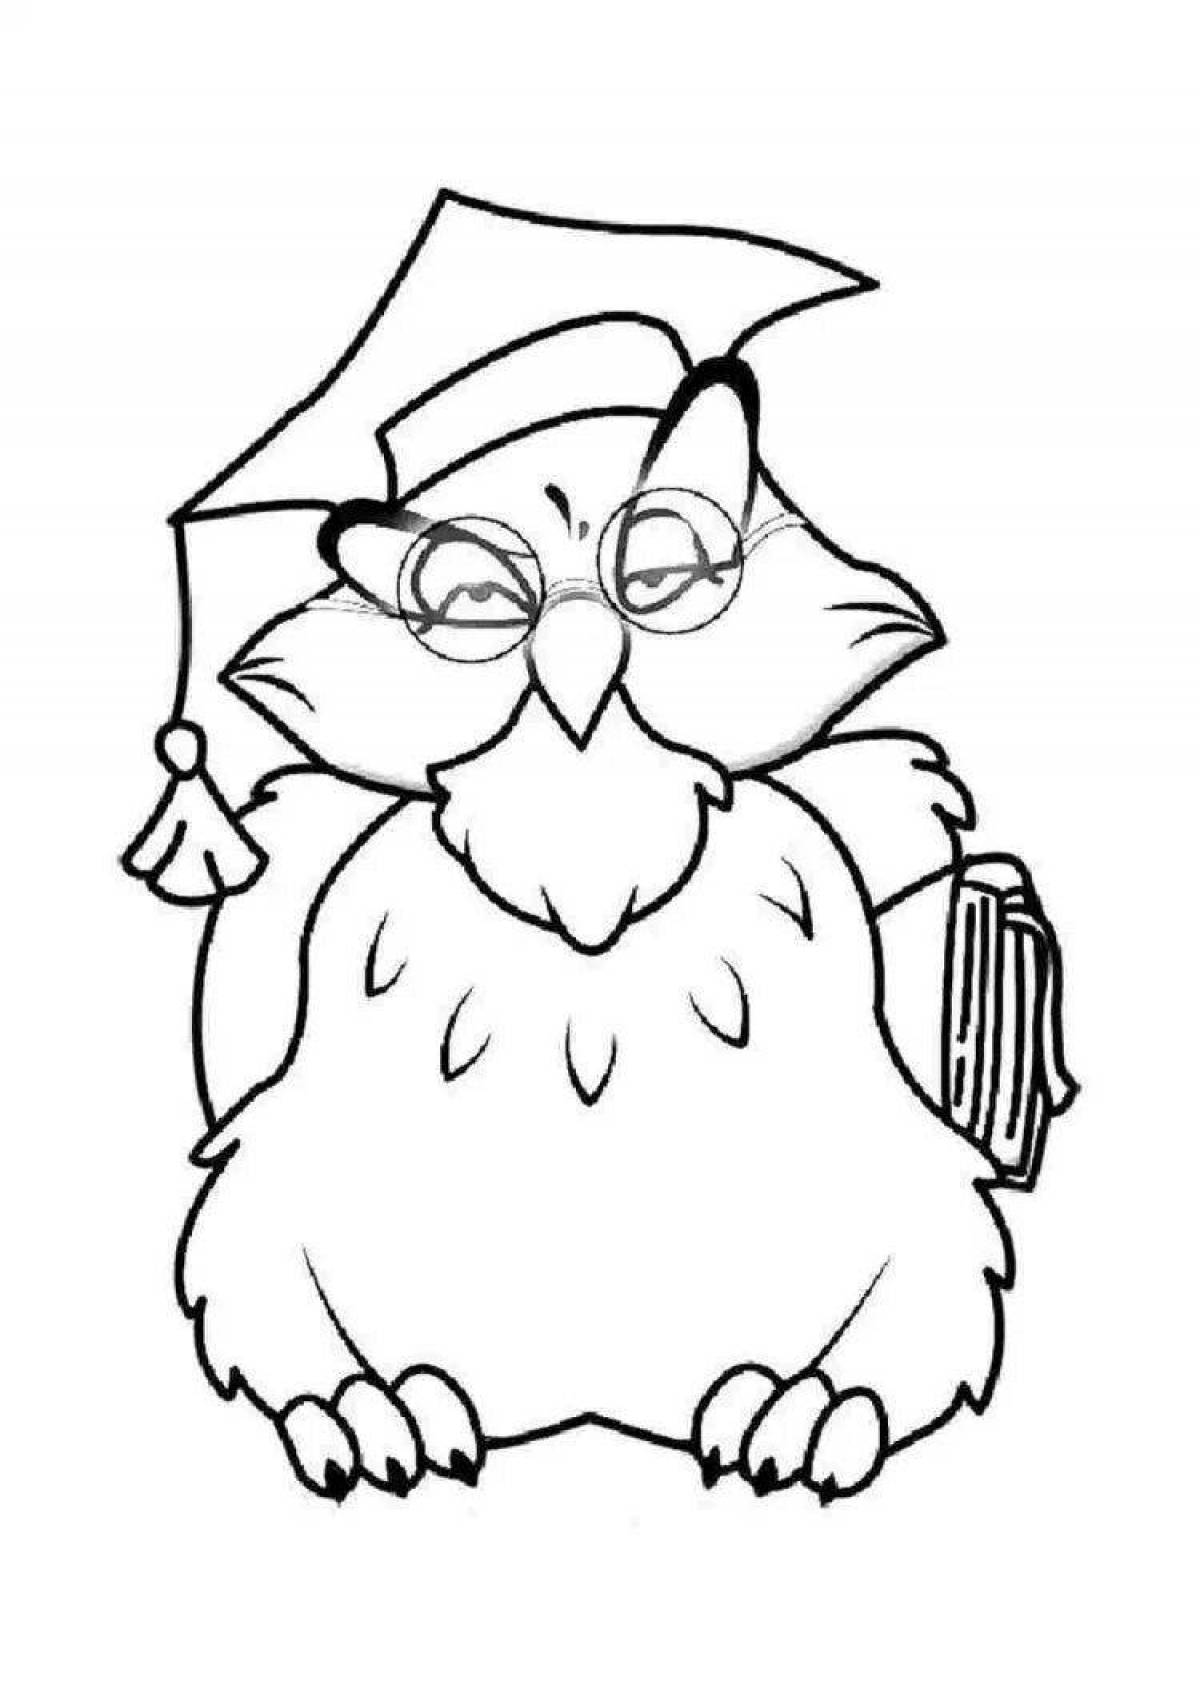 Owl with books #3